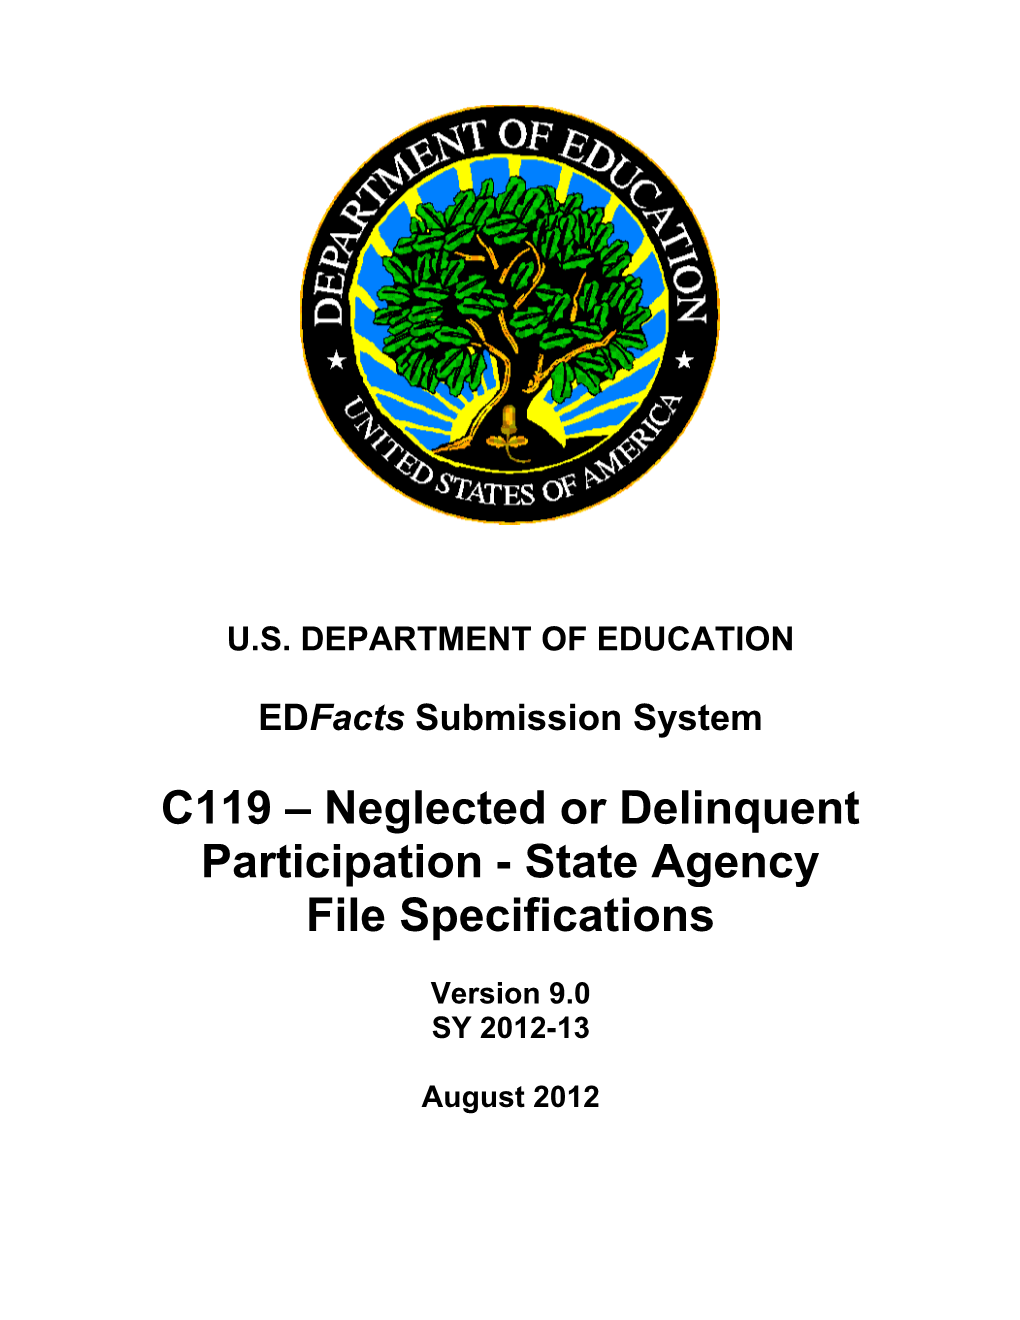 N Or D Participation - State Agency File Specifications